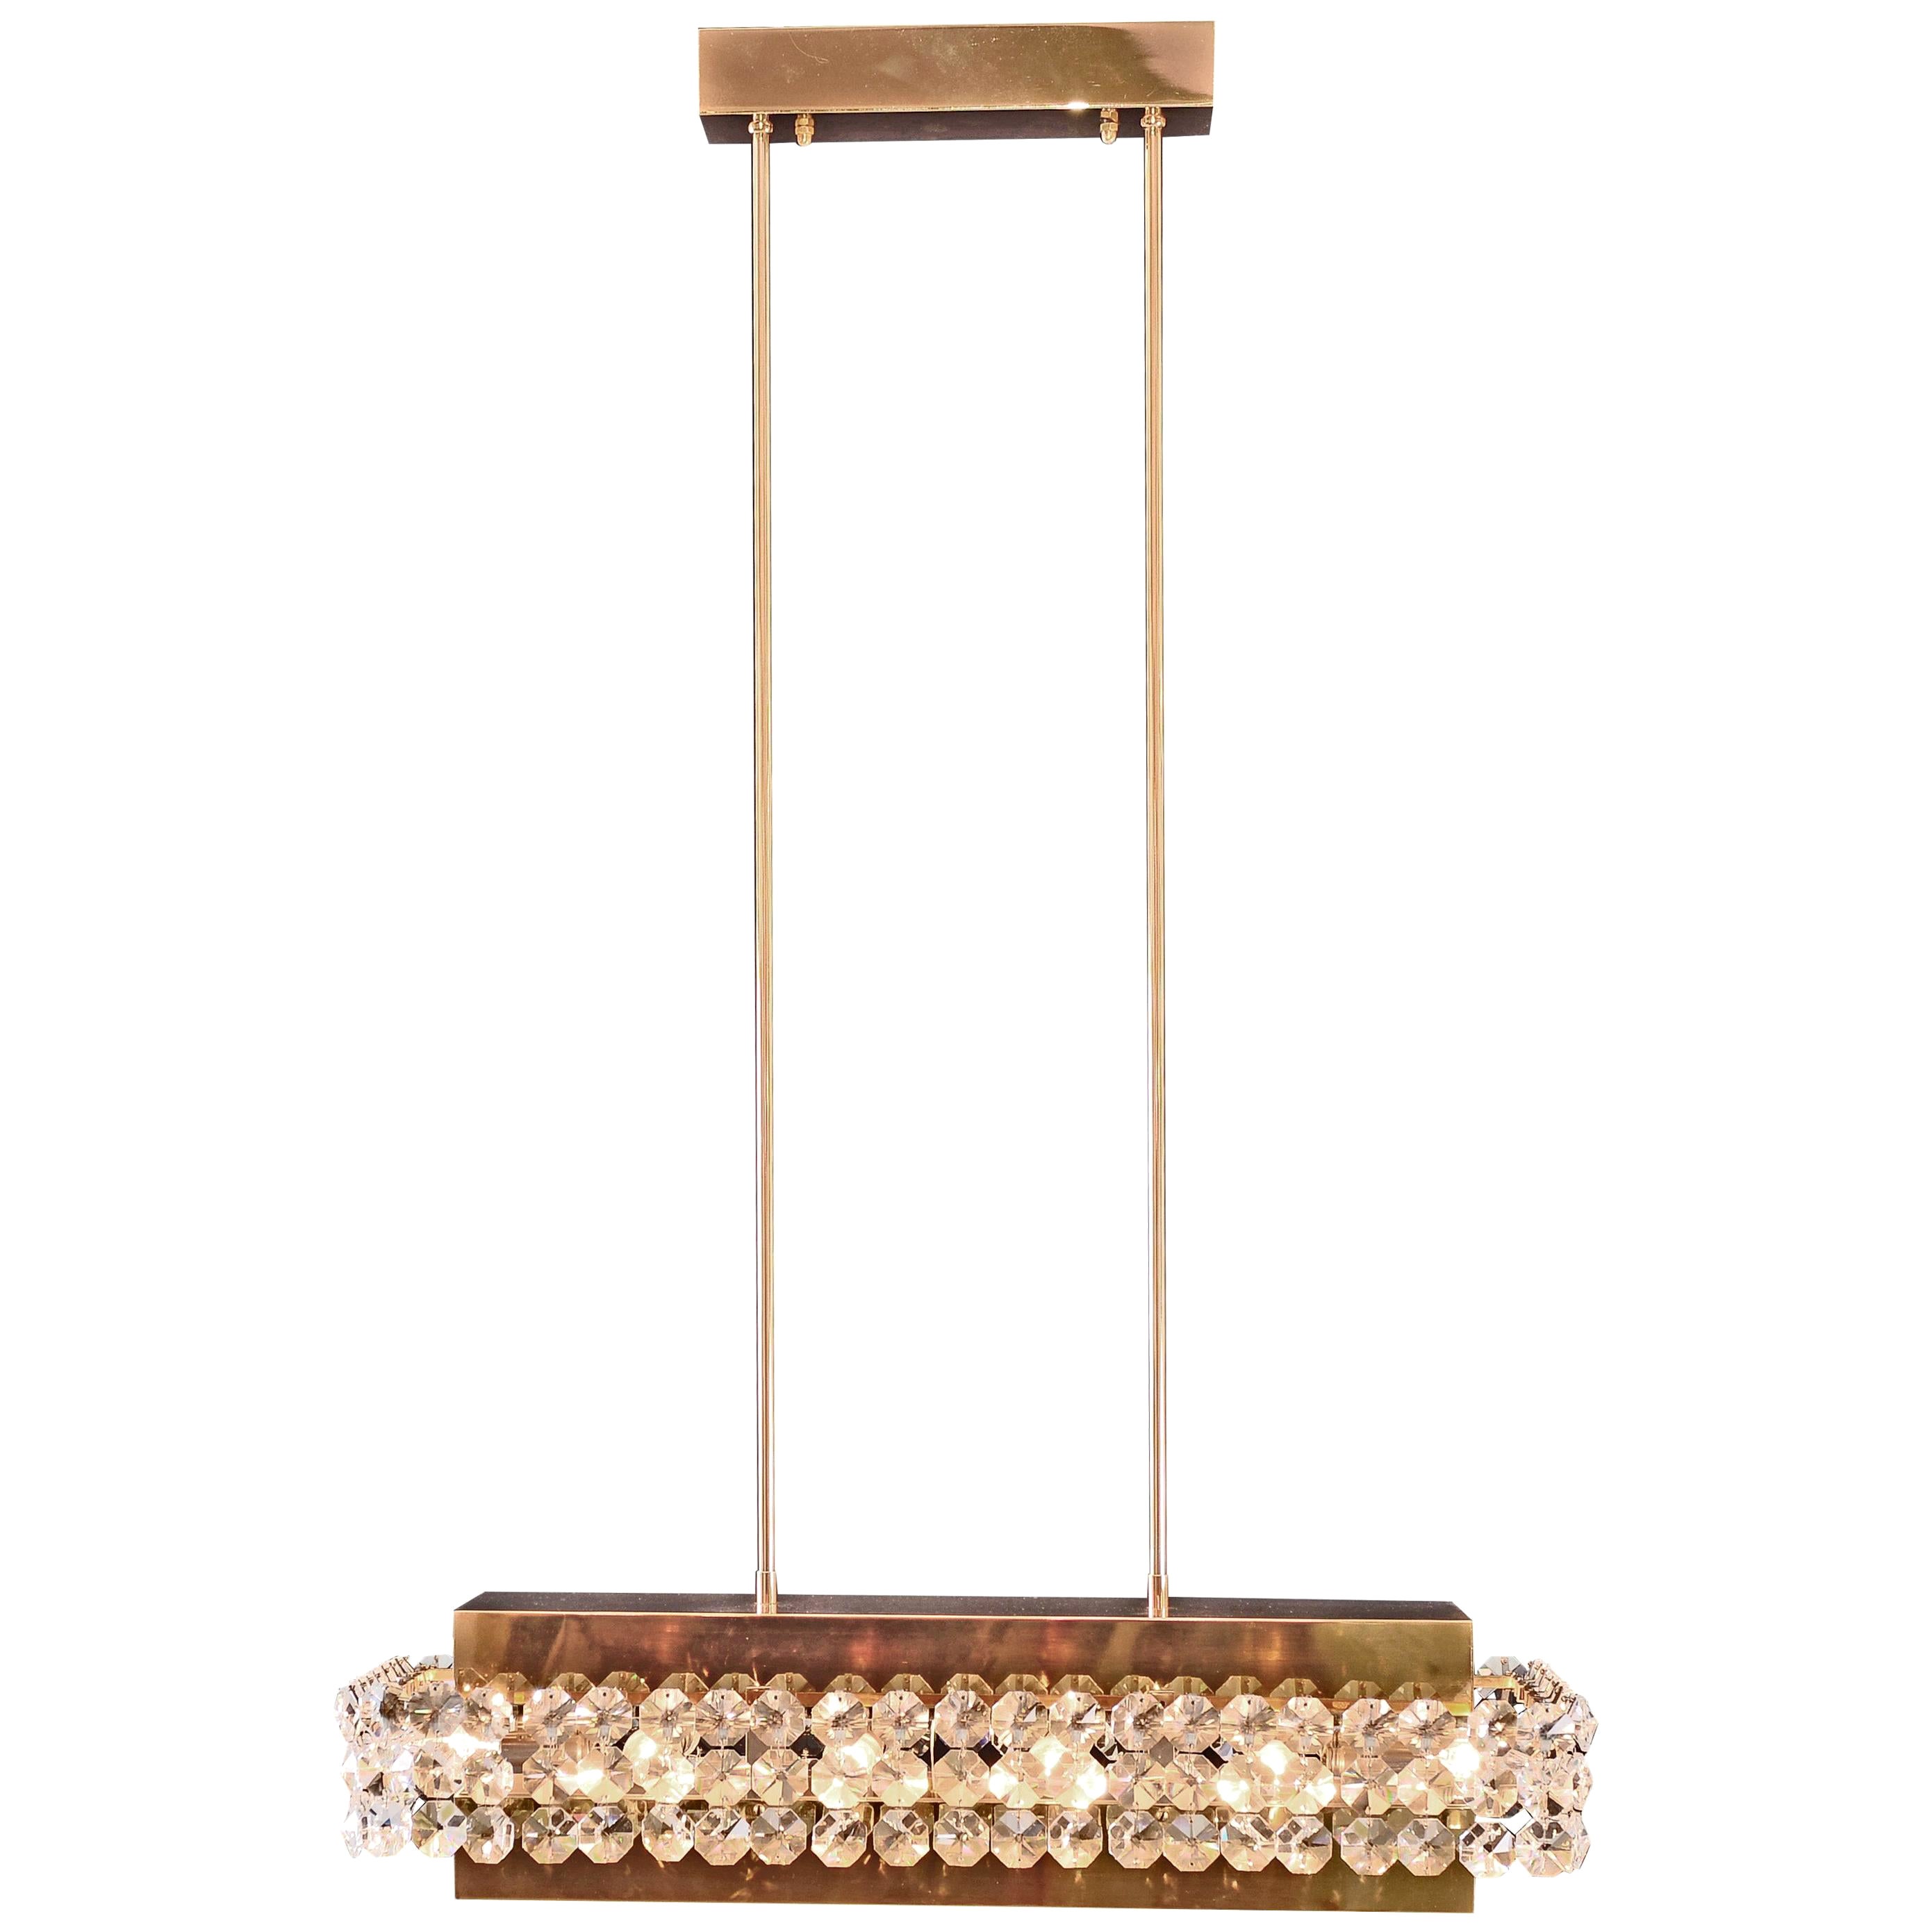 Magnificent Mid-Century Modern Crystal Glass and Brass Chandelier, Re Edition For Sale